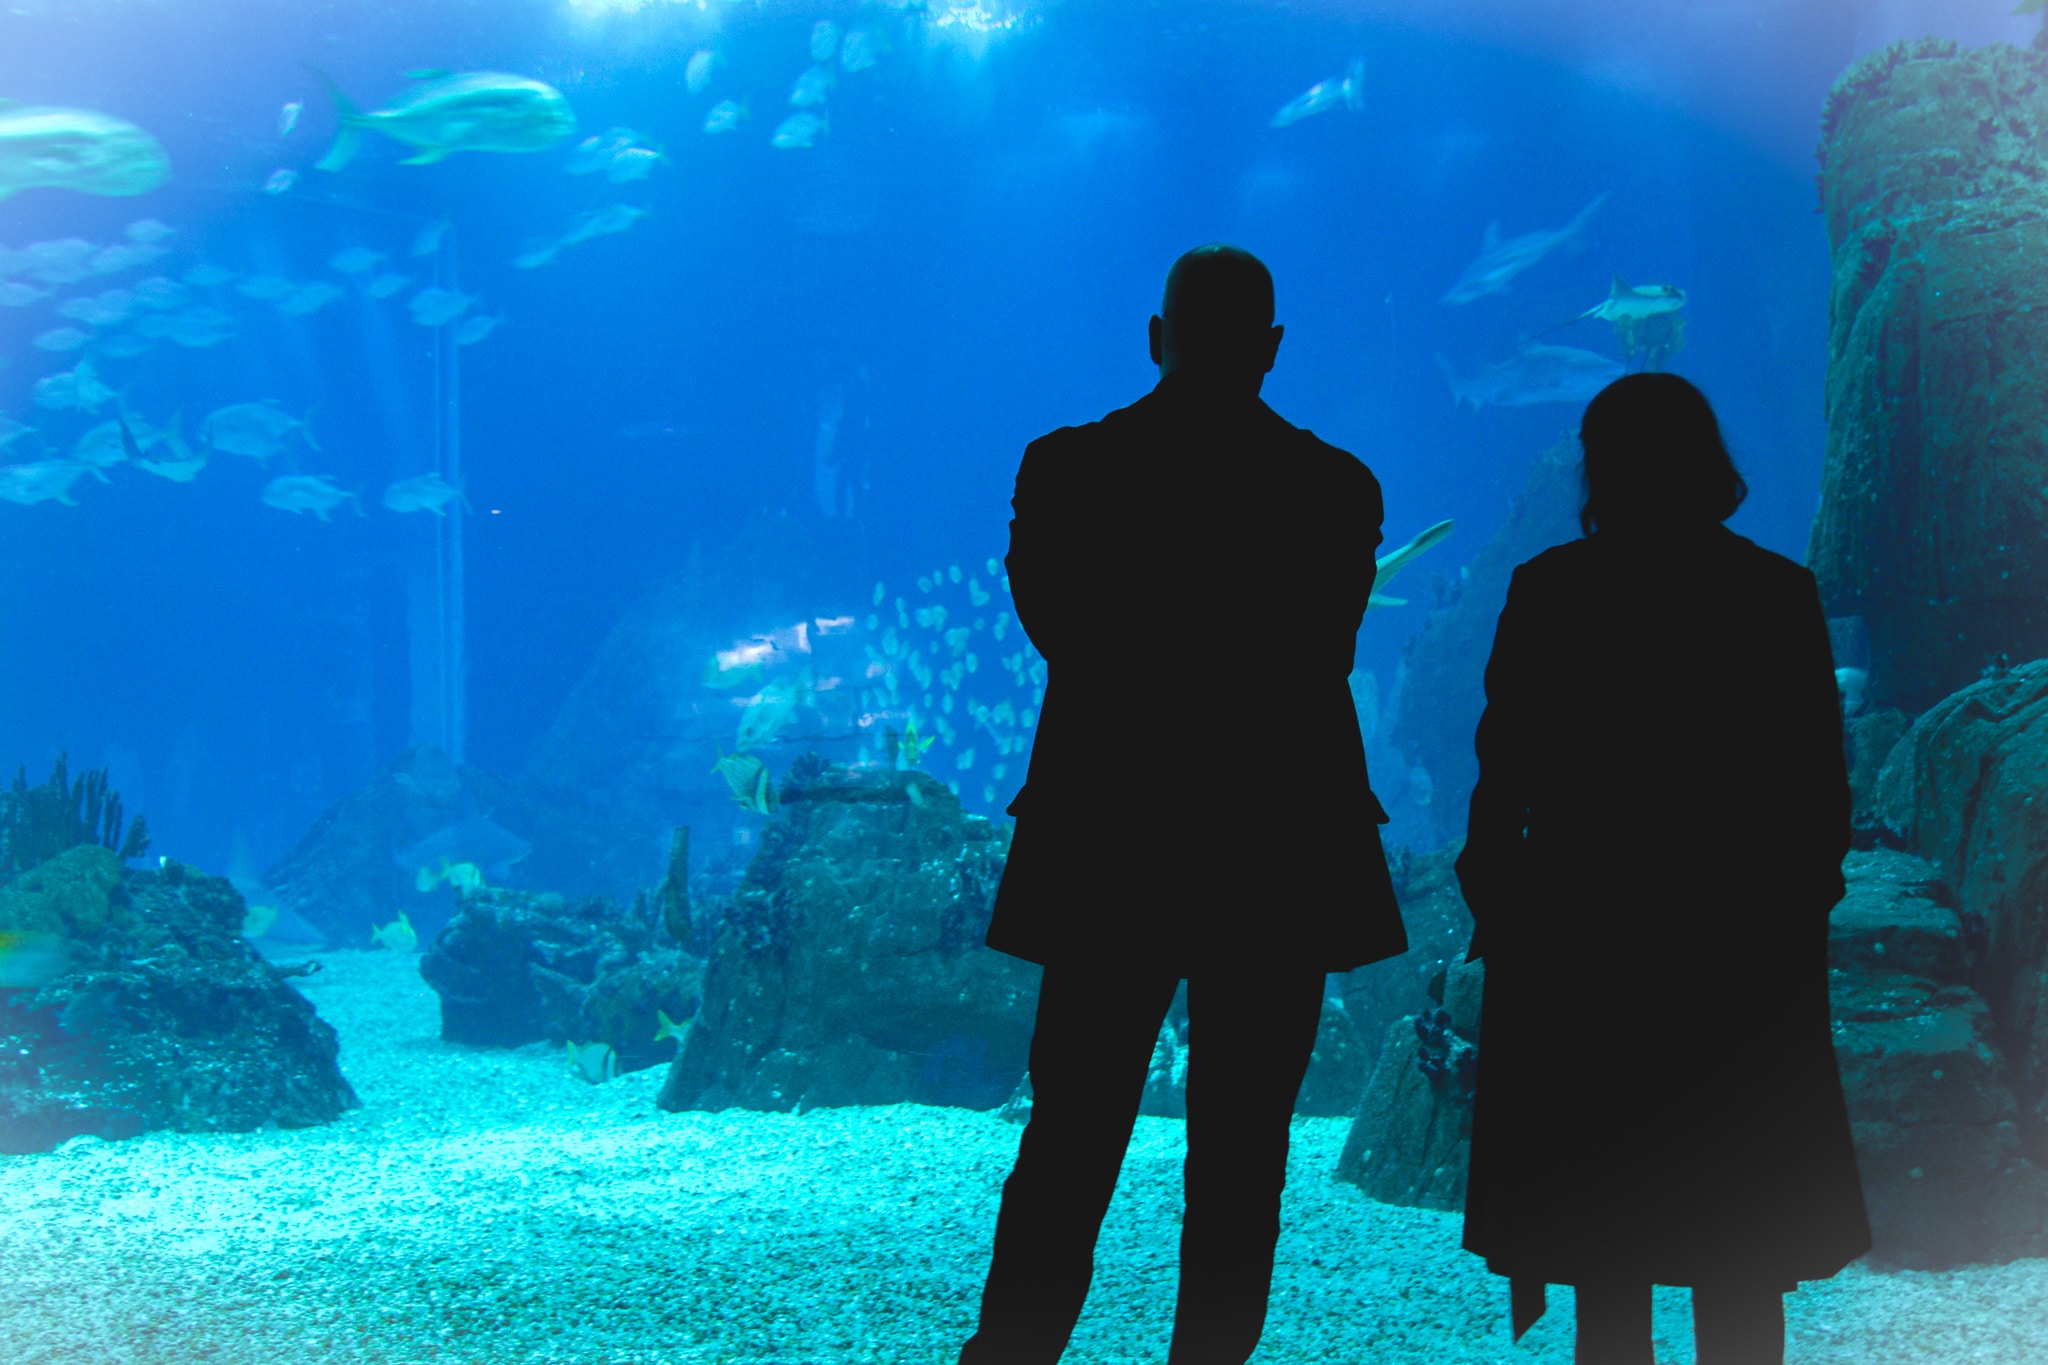 Two people standing in an aquarium